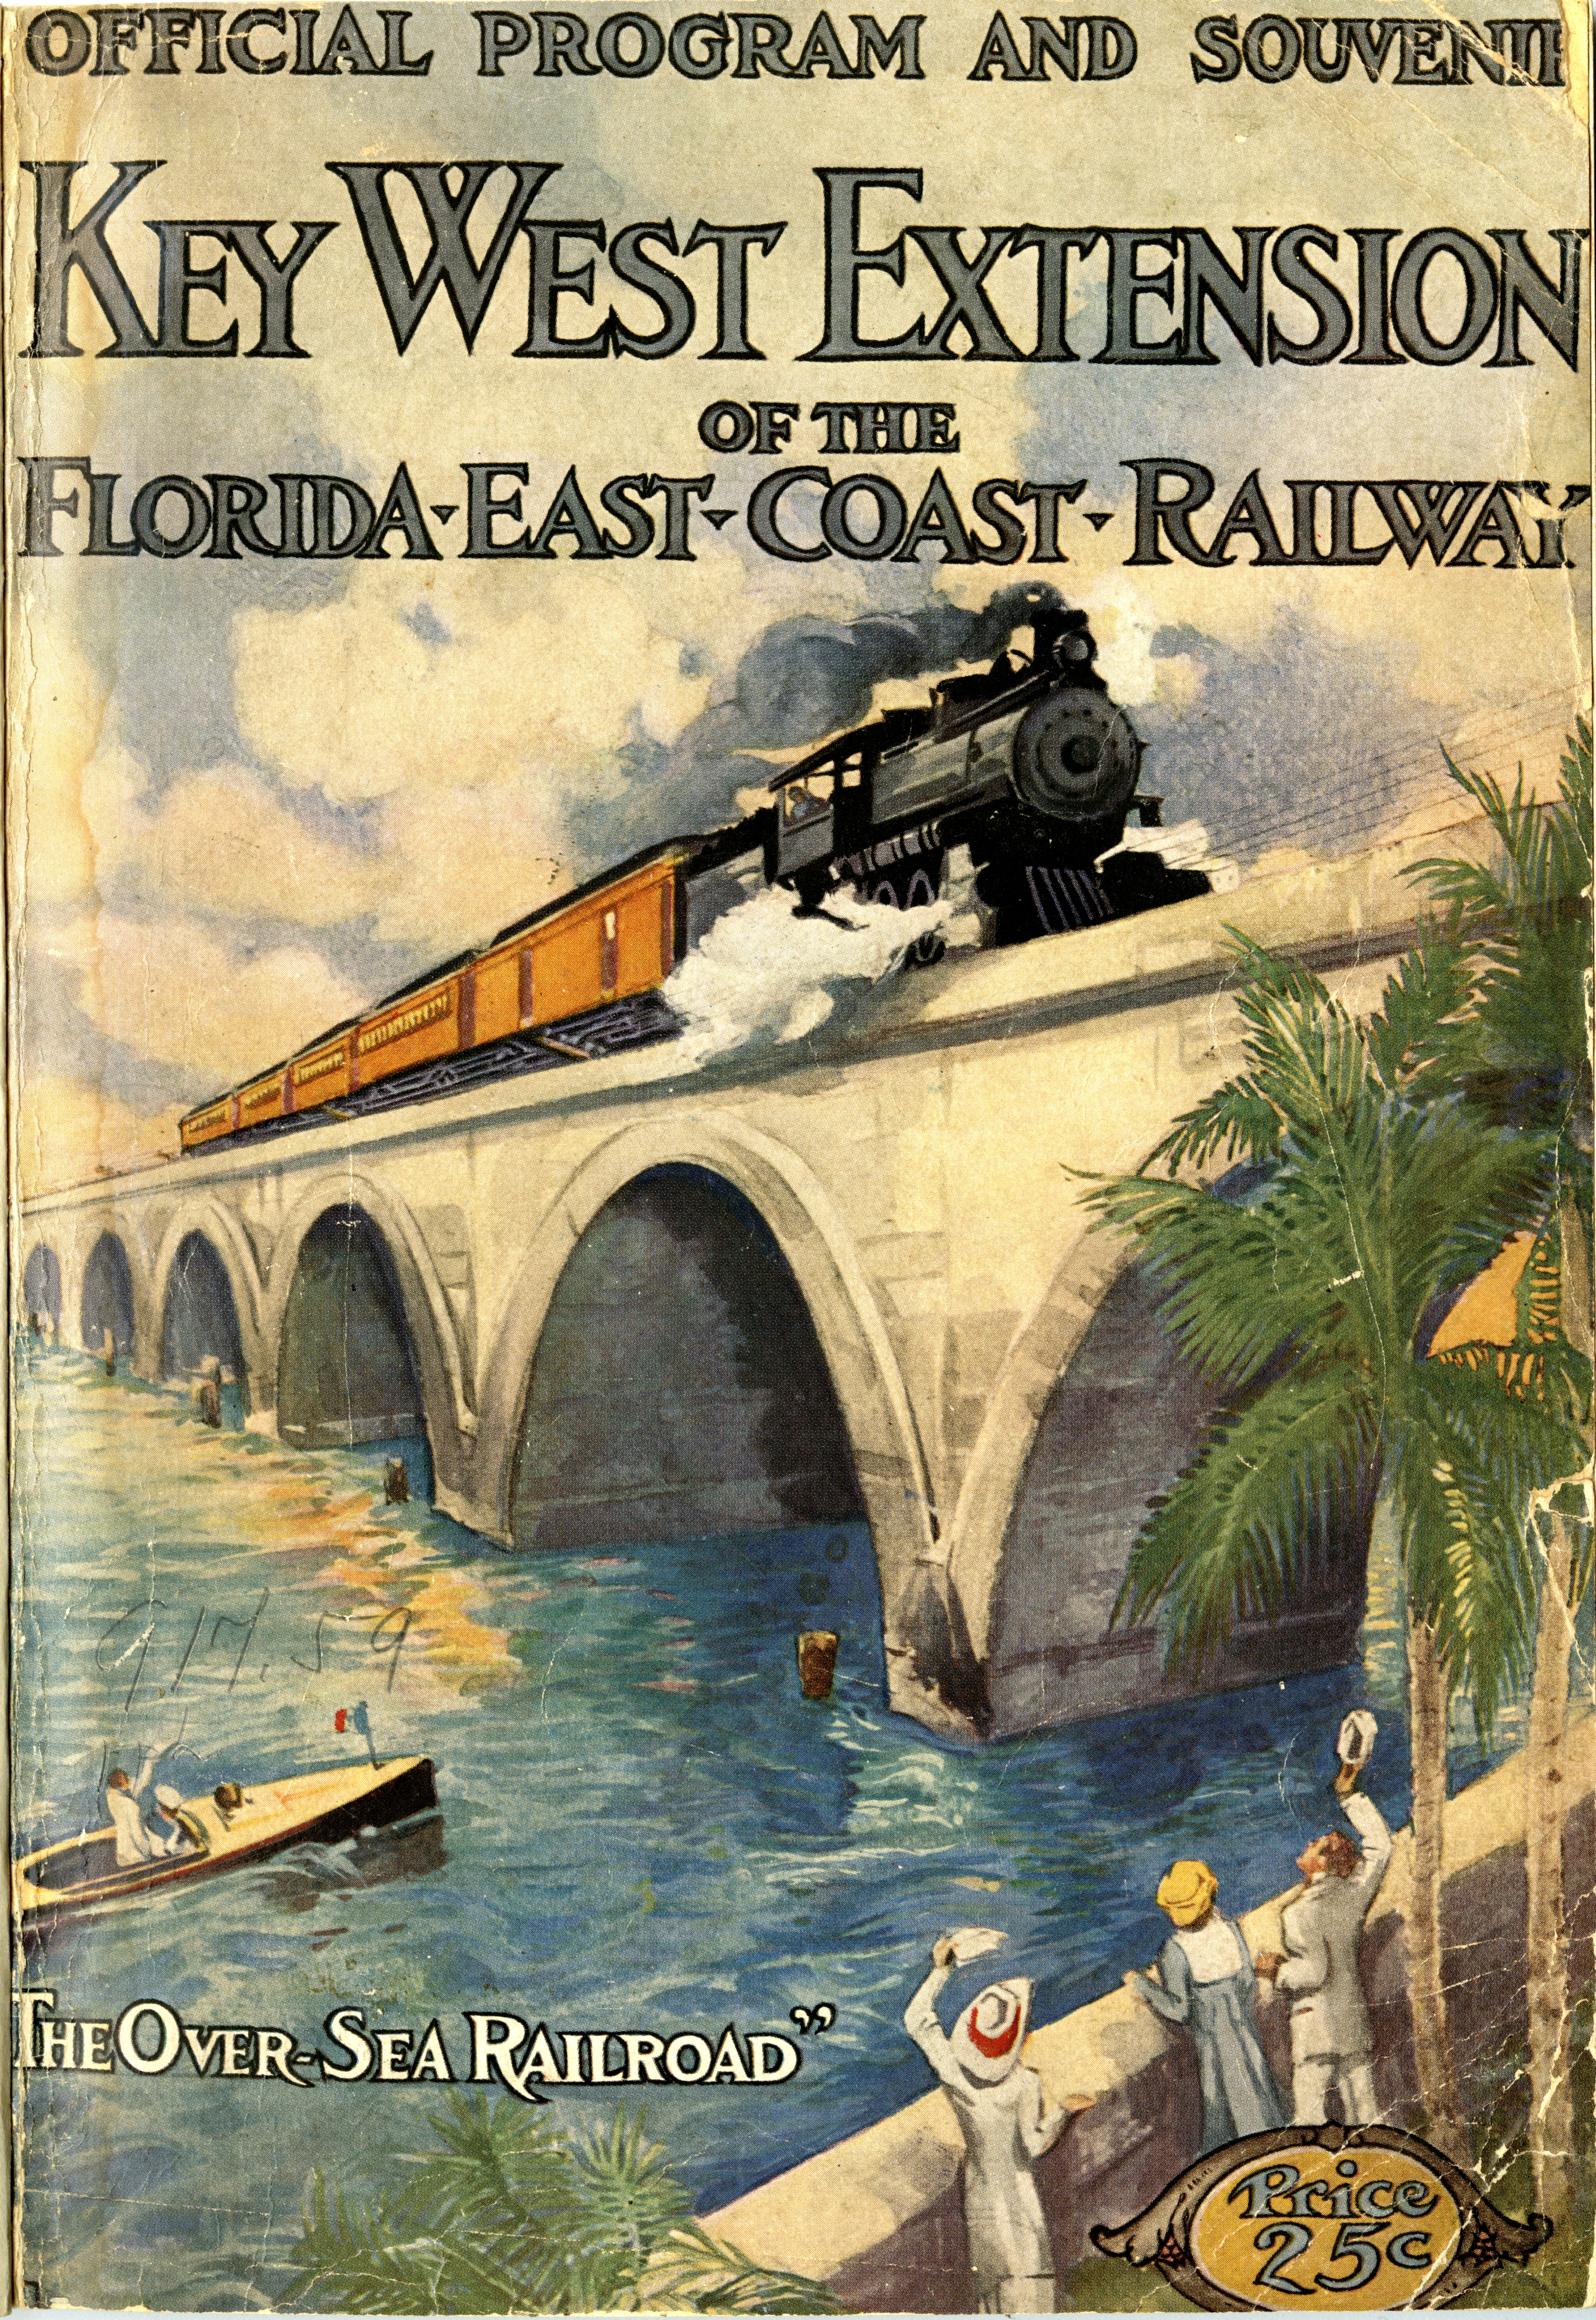 Key West Extension of the Florida East Coast Railway